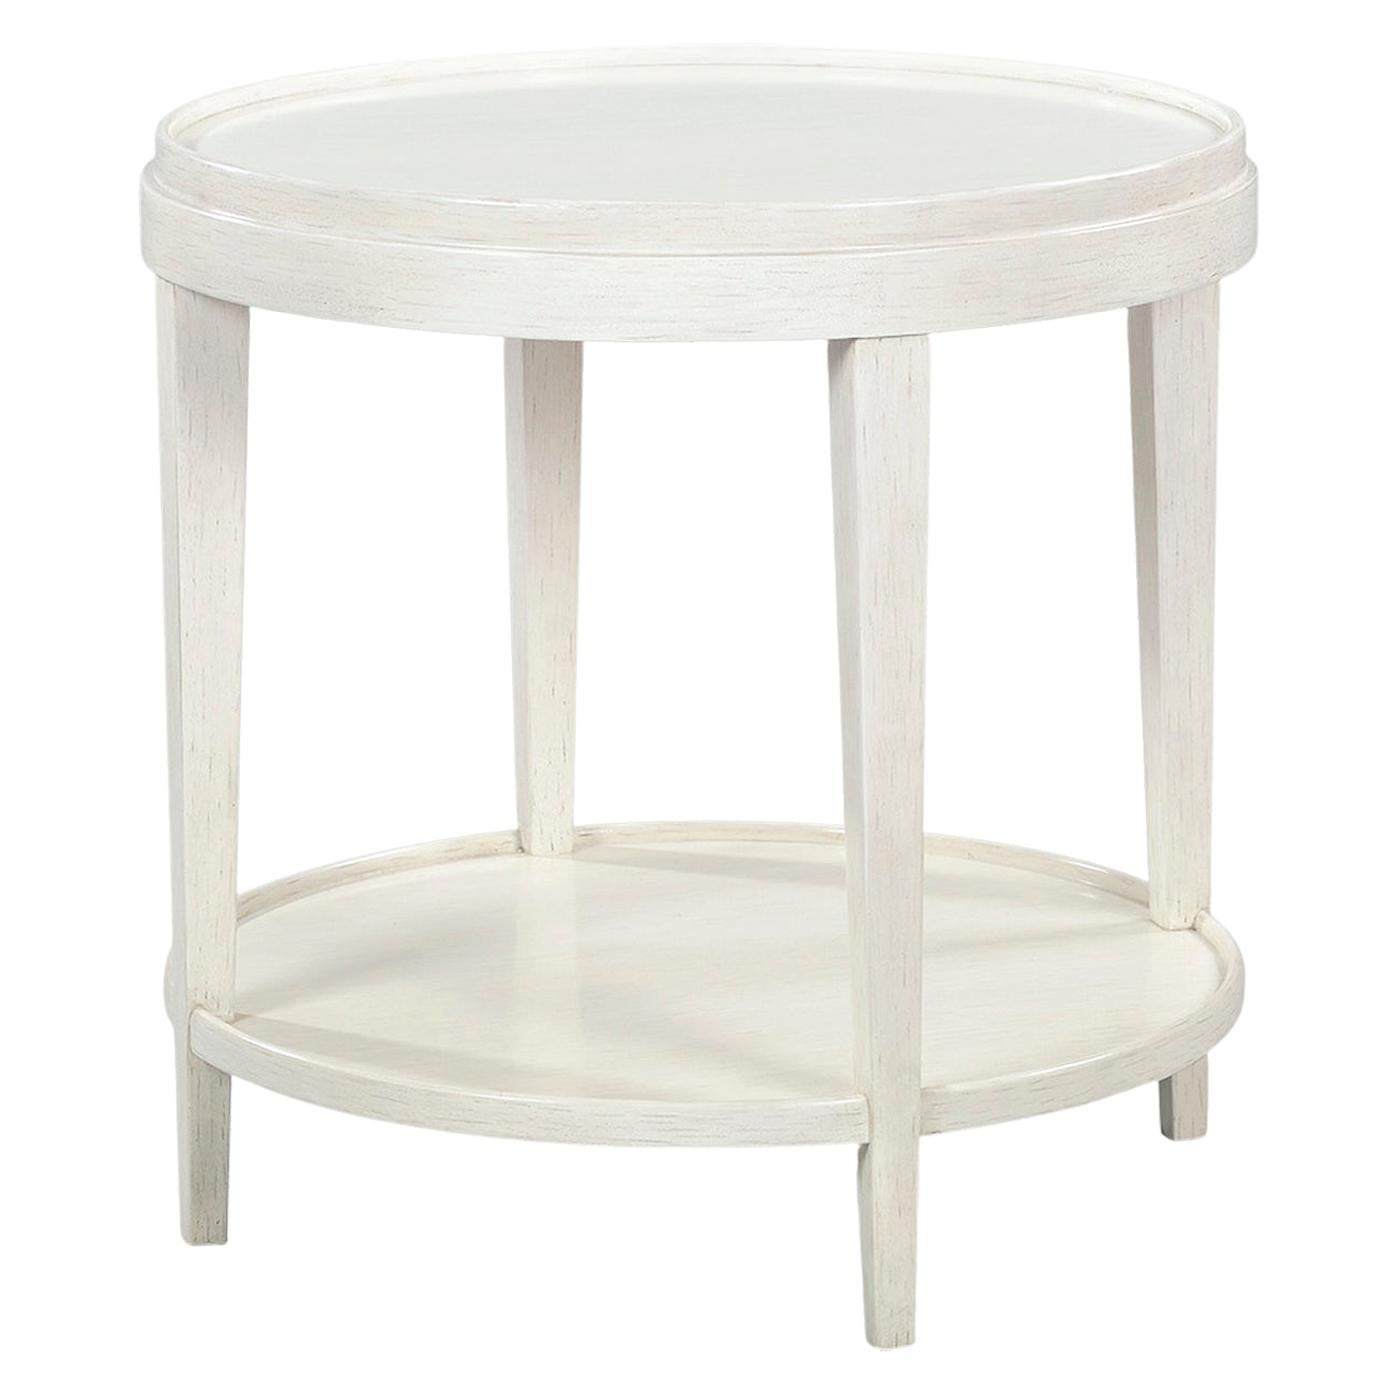 Classic Round End Table, Distressed White For Sale